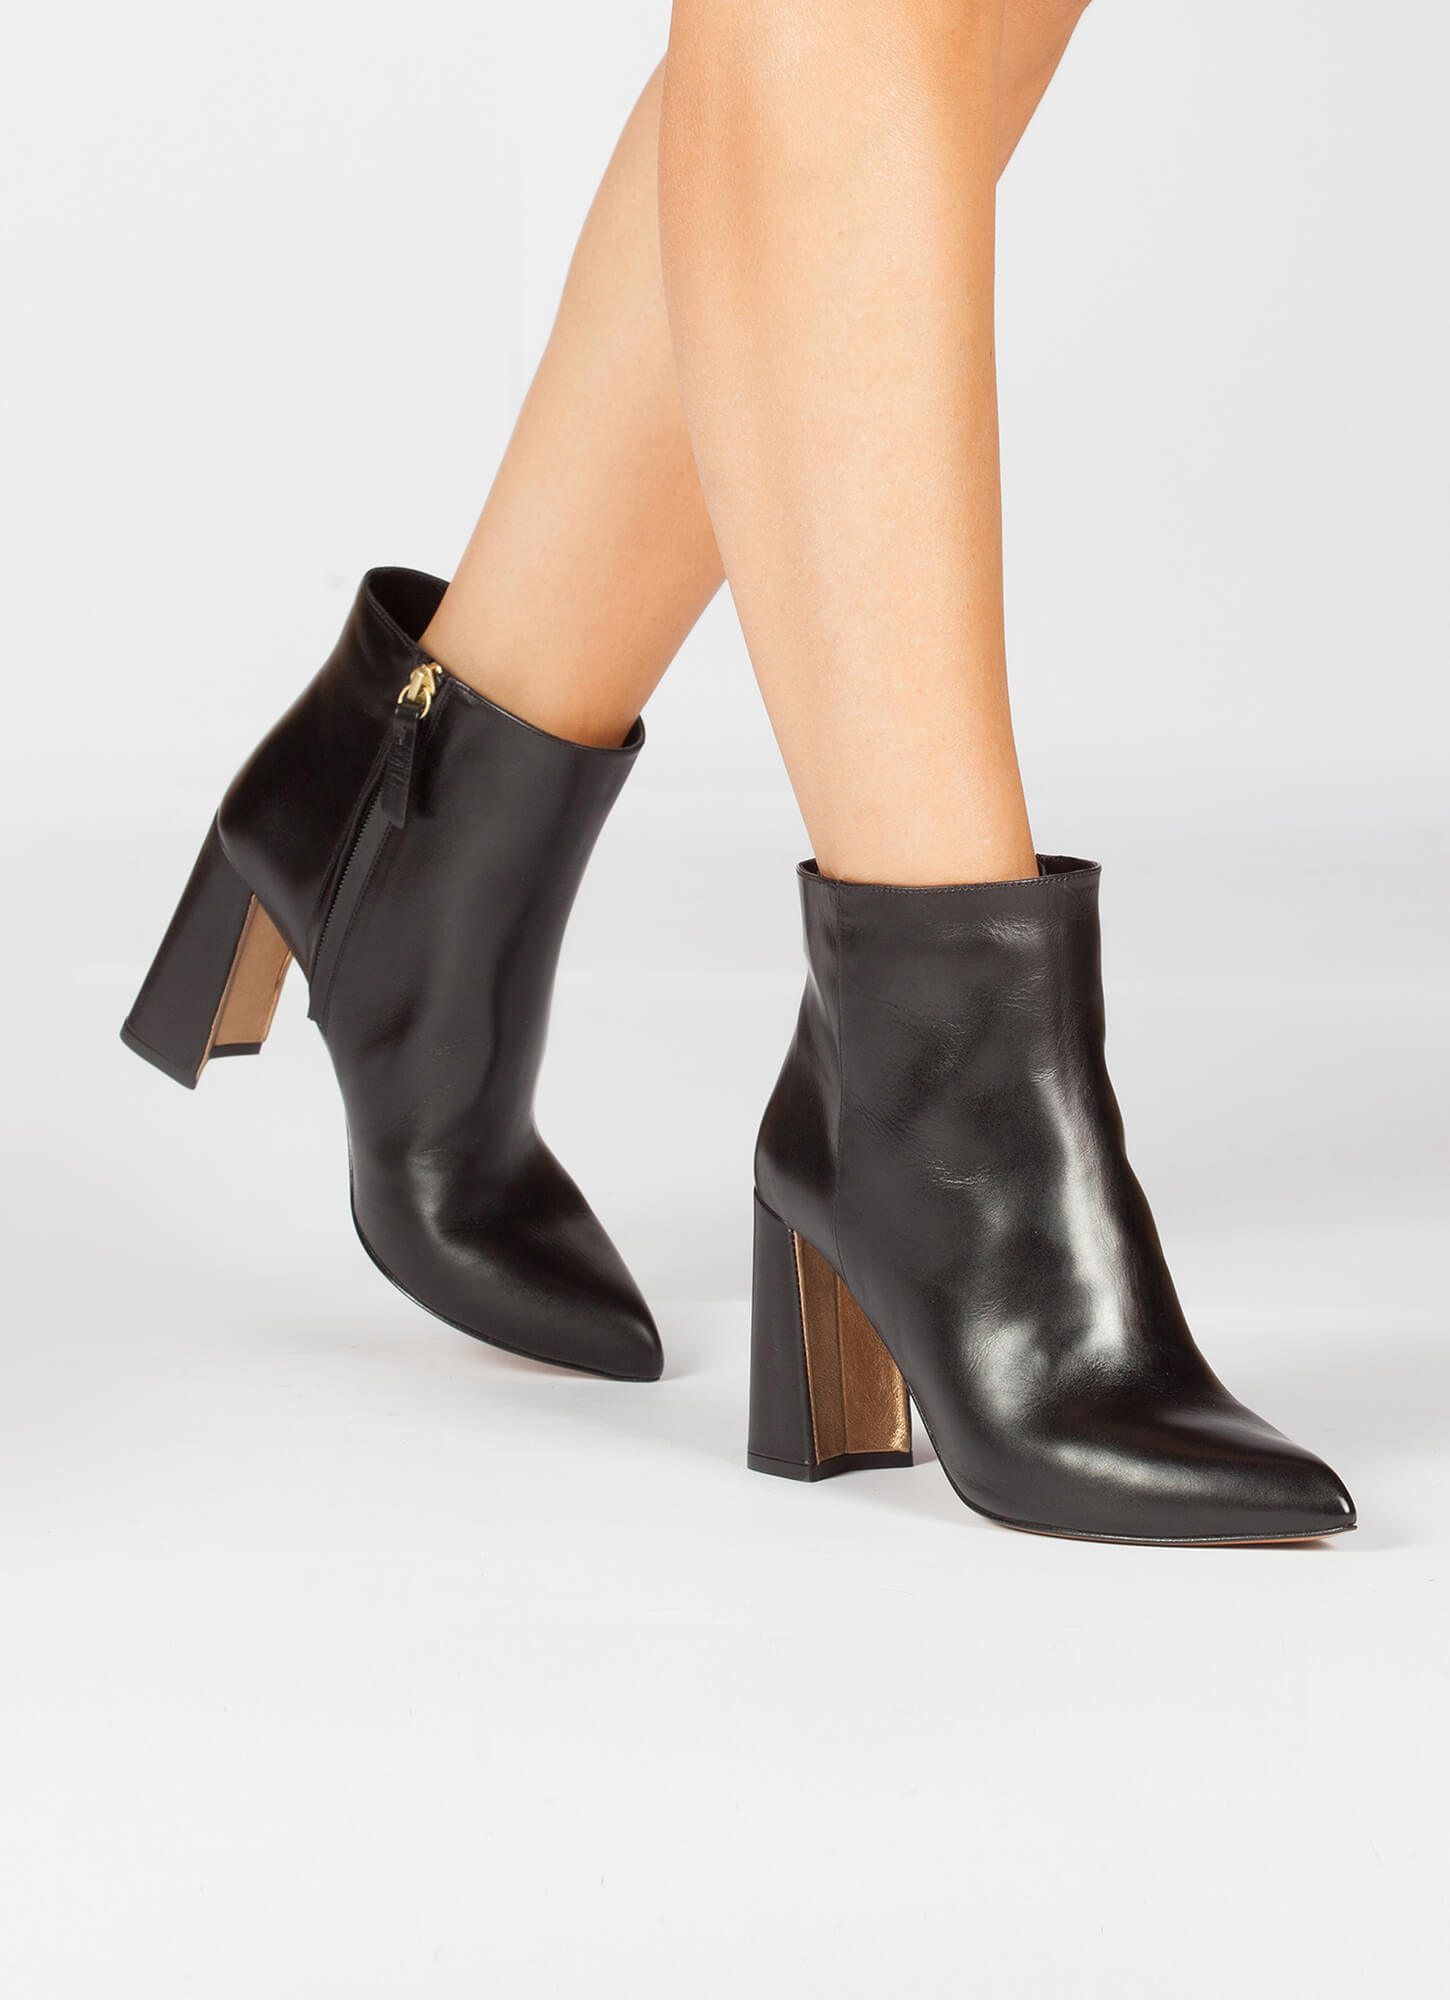 Black leather high block heel ankle boots . PURA LOPEZ